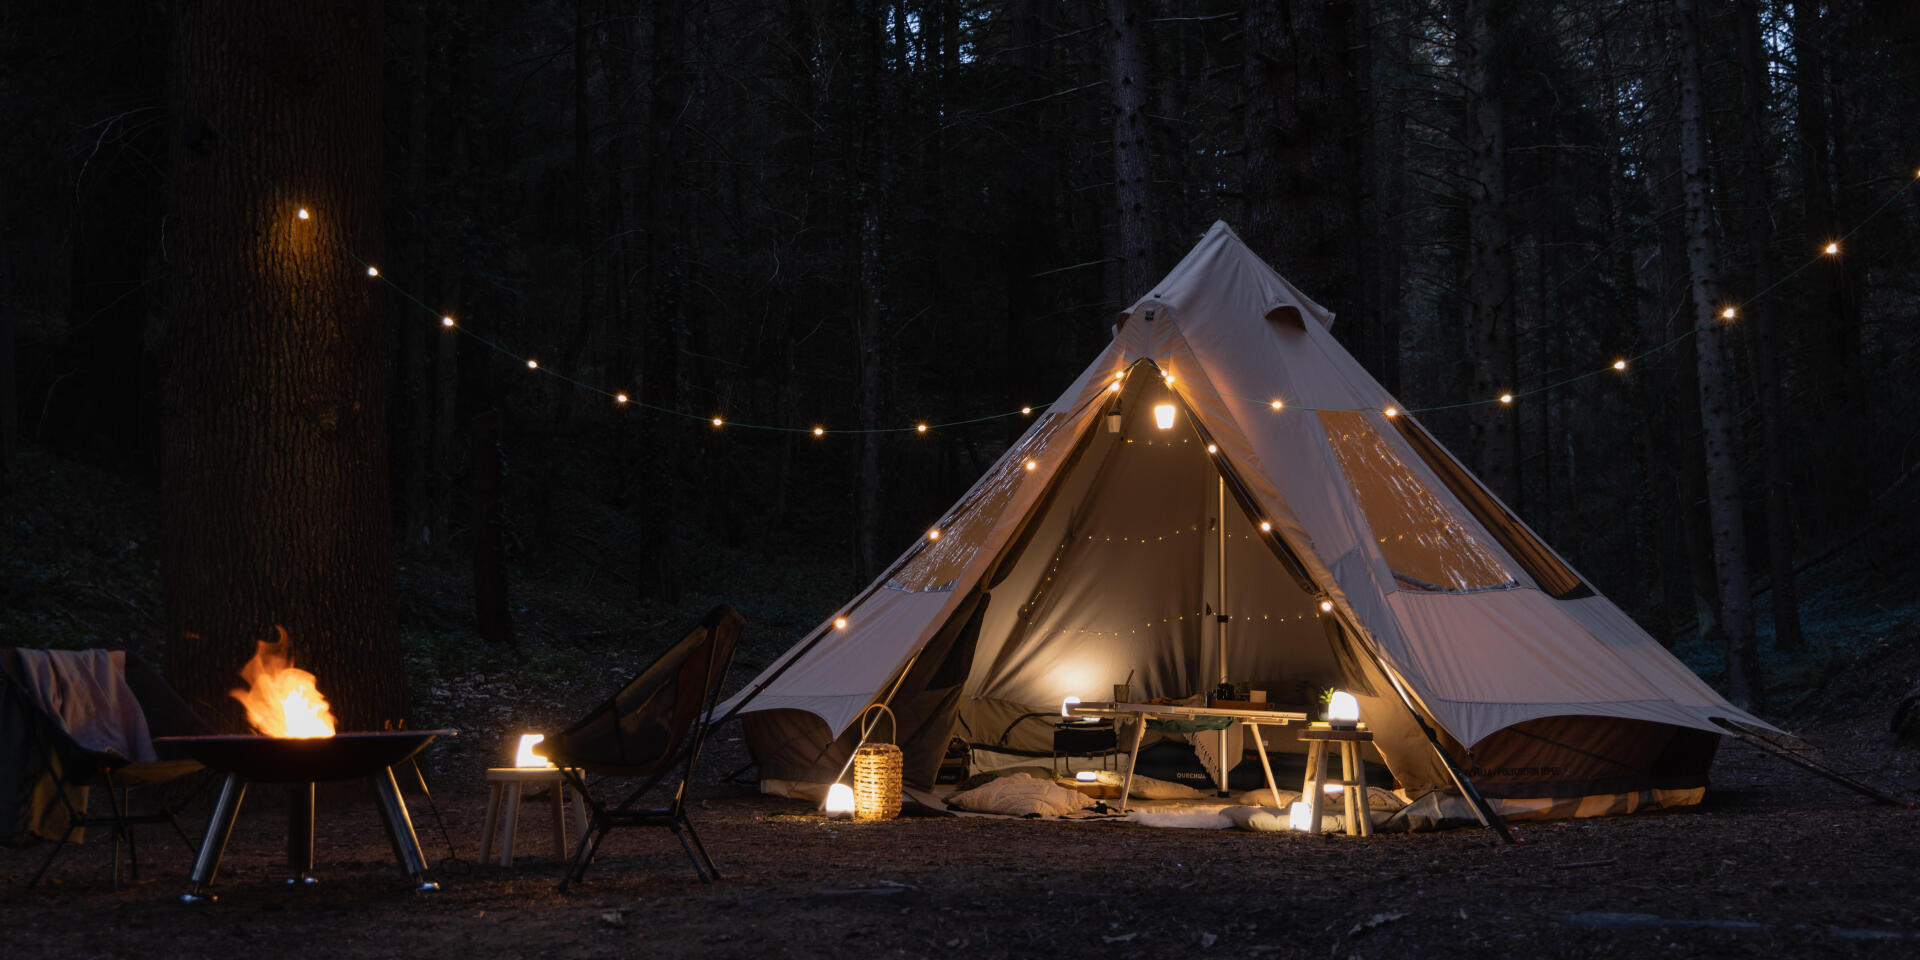 Glamping - camping, only better!